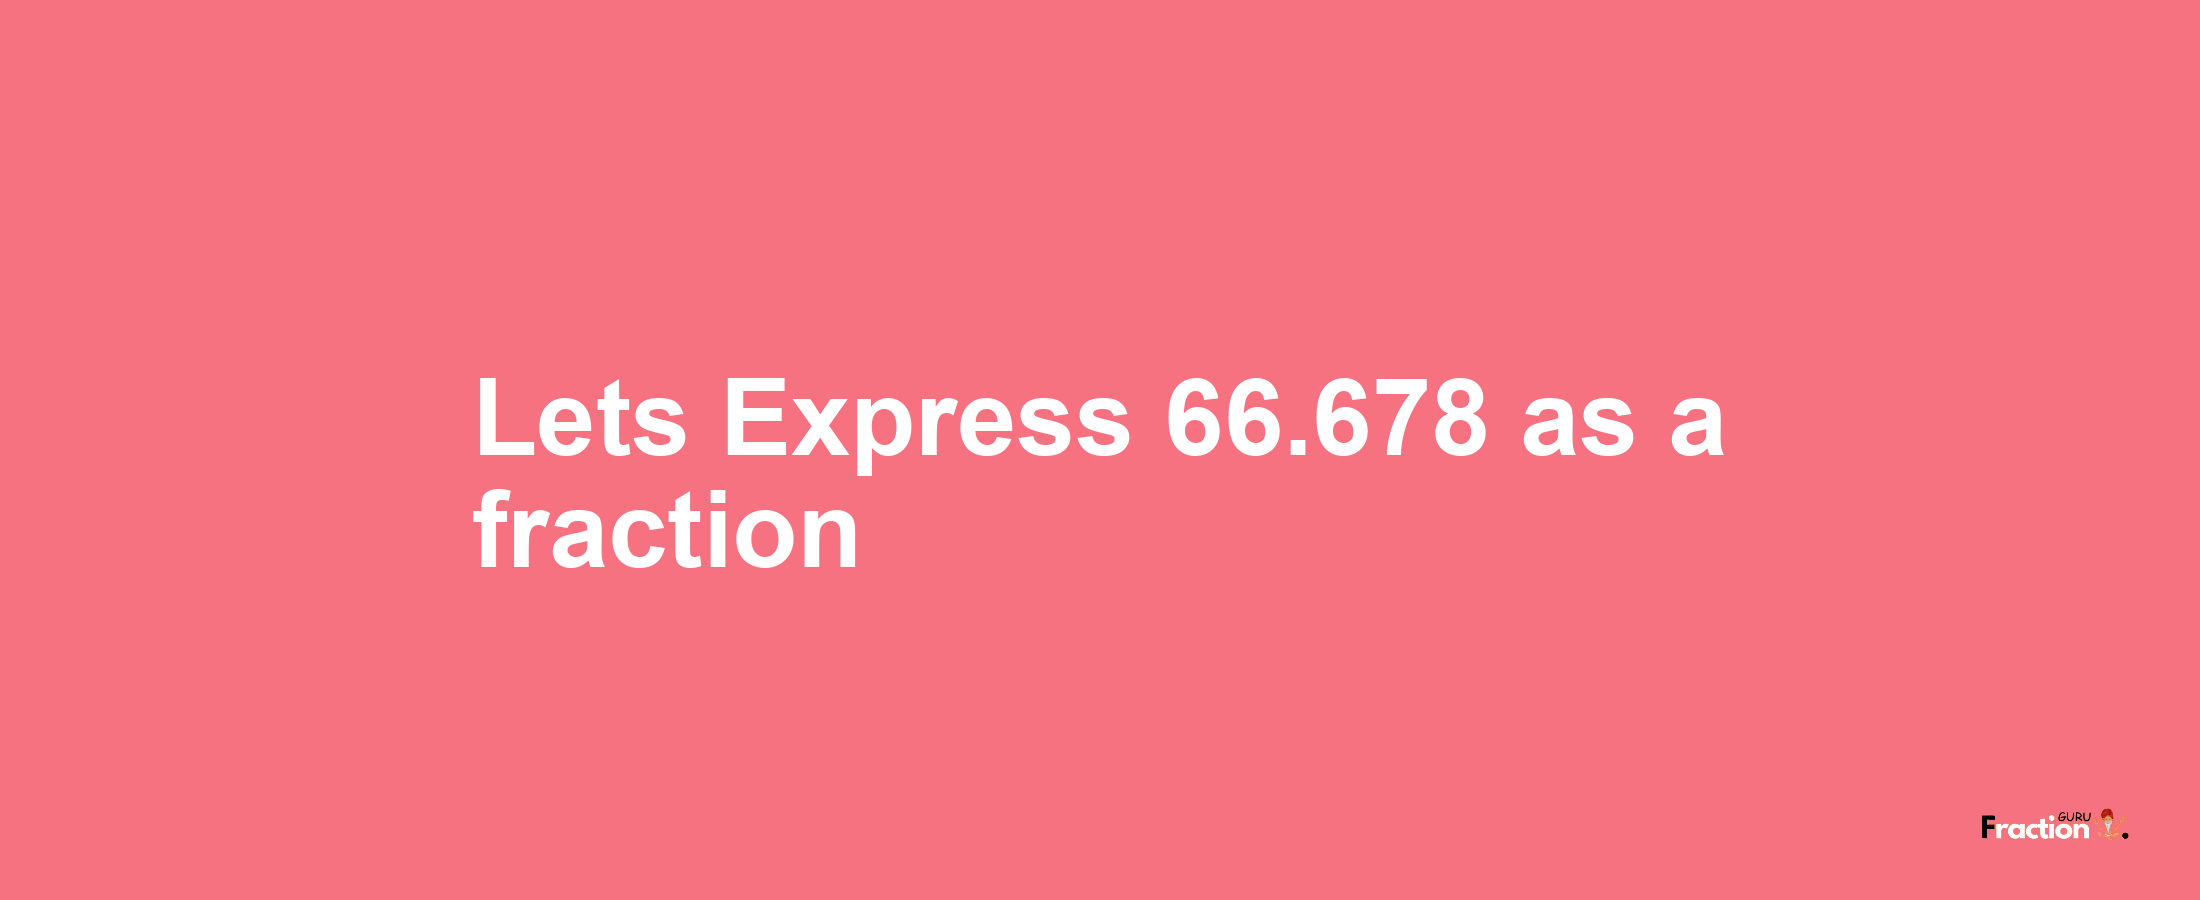 Lets Express 66.678 as afraction